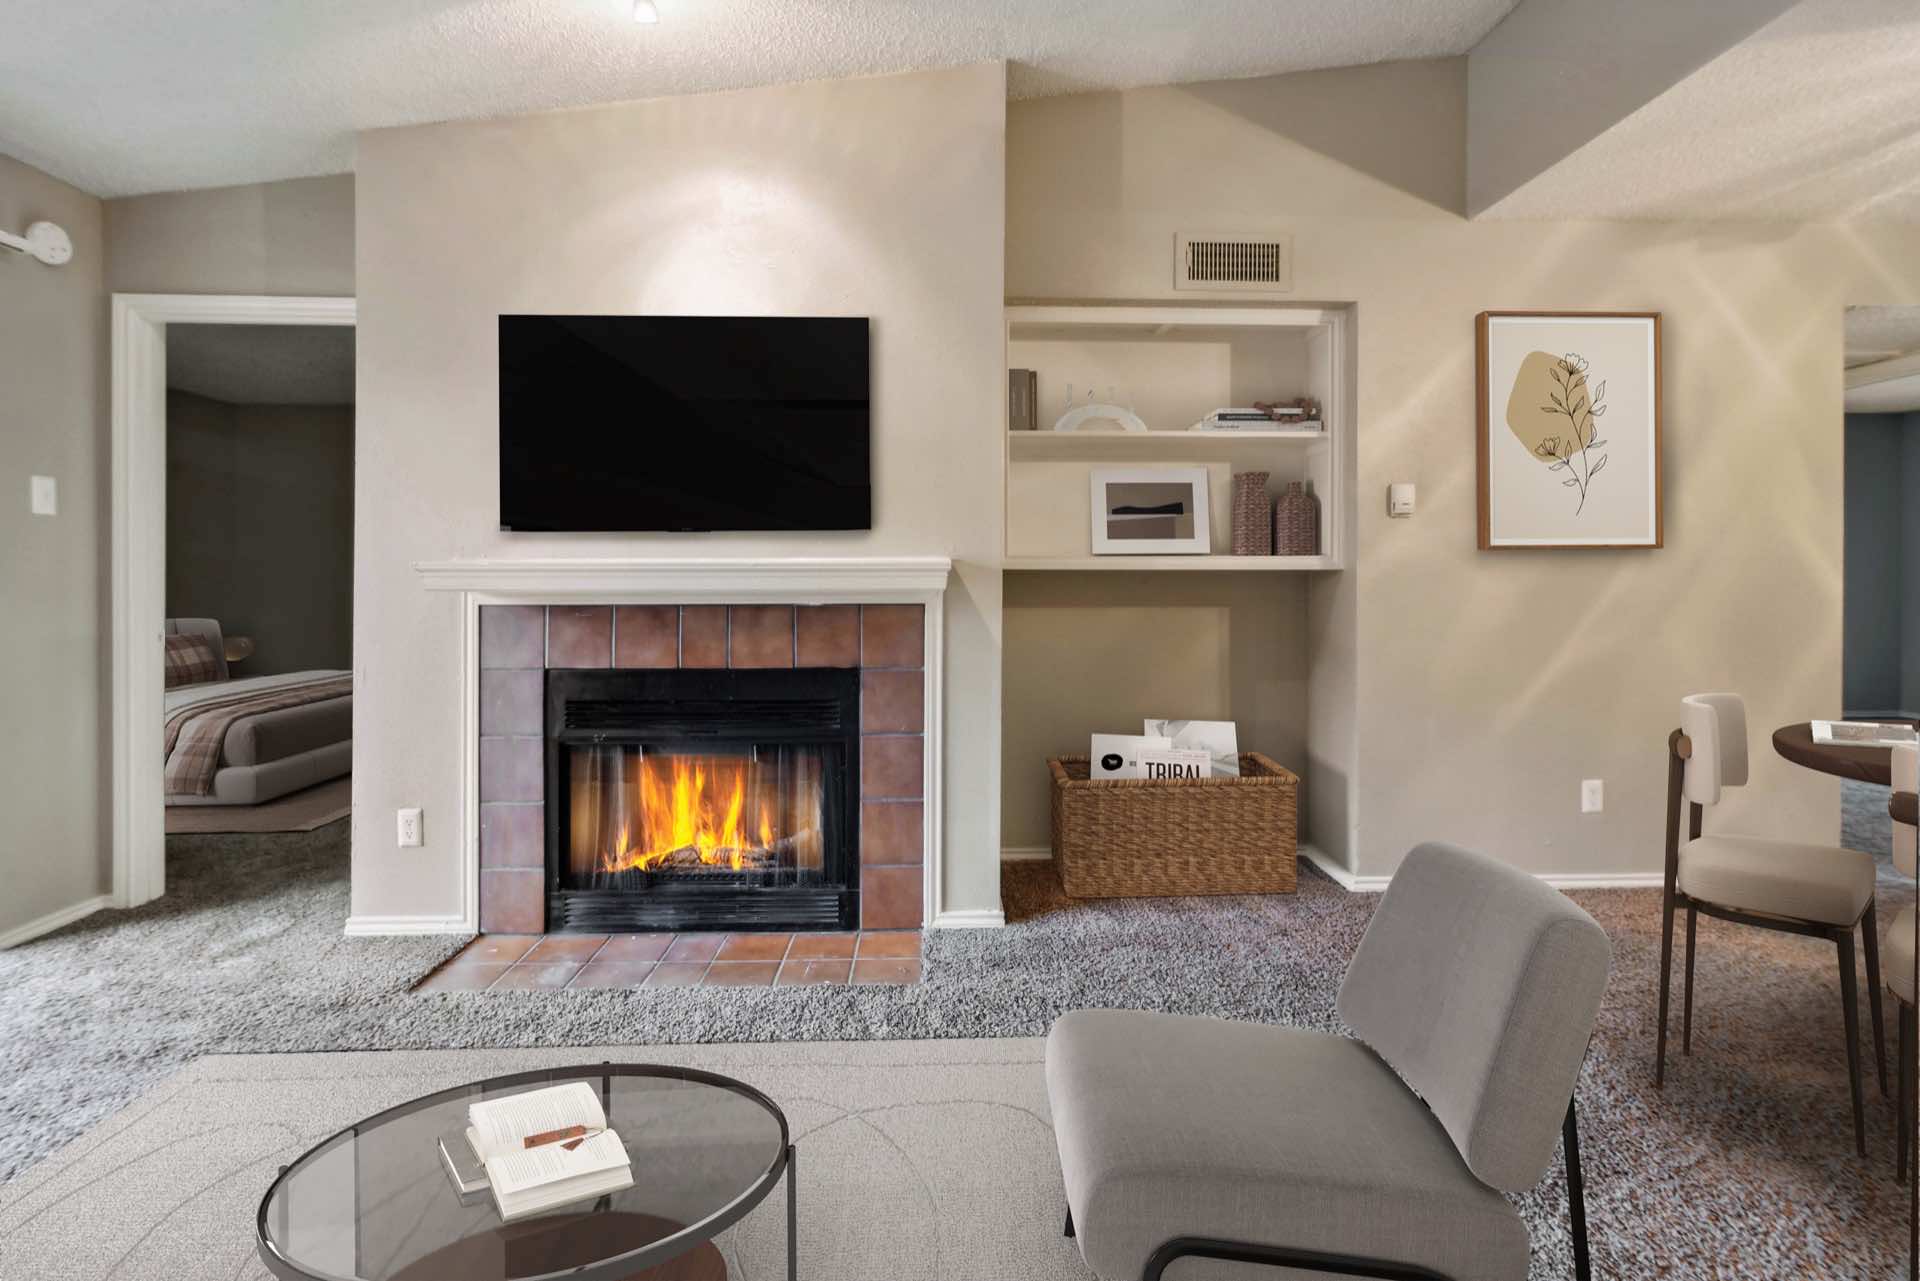 Fireplace and built-in shelves